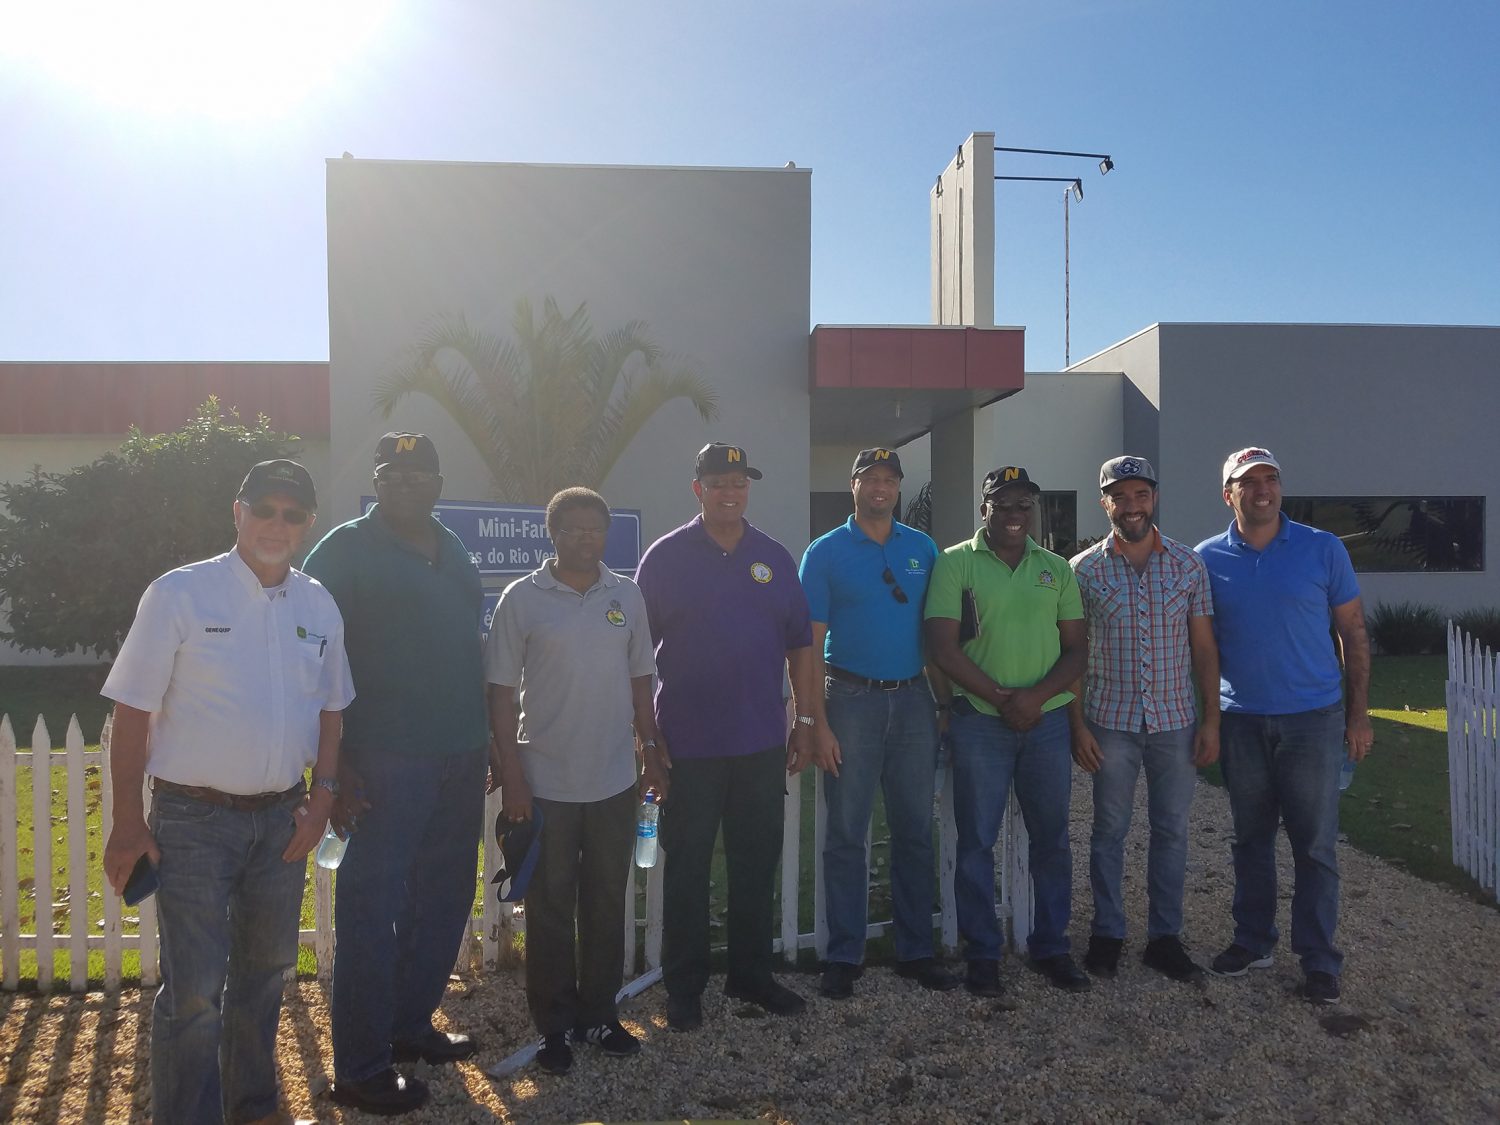 Agriculture Minister Noel Holder is fifth from left, Head of the NDIA Frederick Flatts is fourth from left and Head of GO-Invest, Owen Verwey is fifth from left.